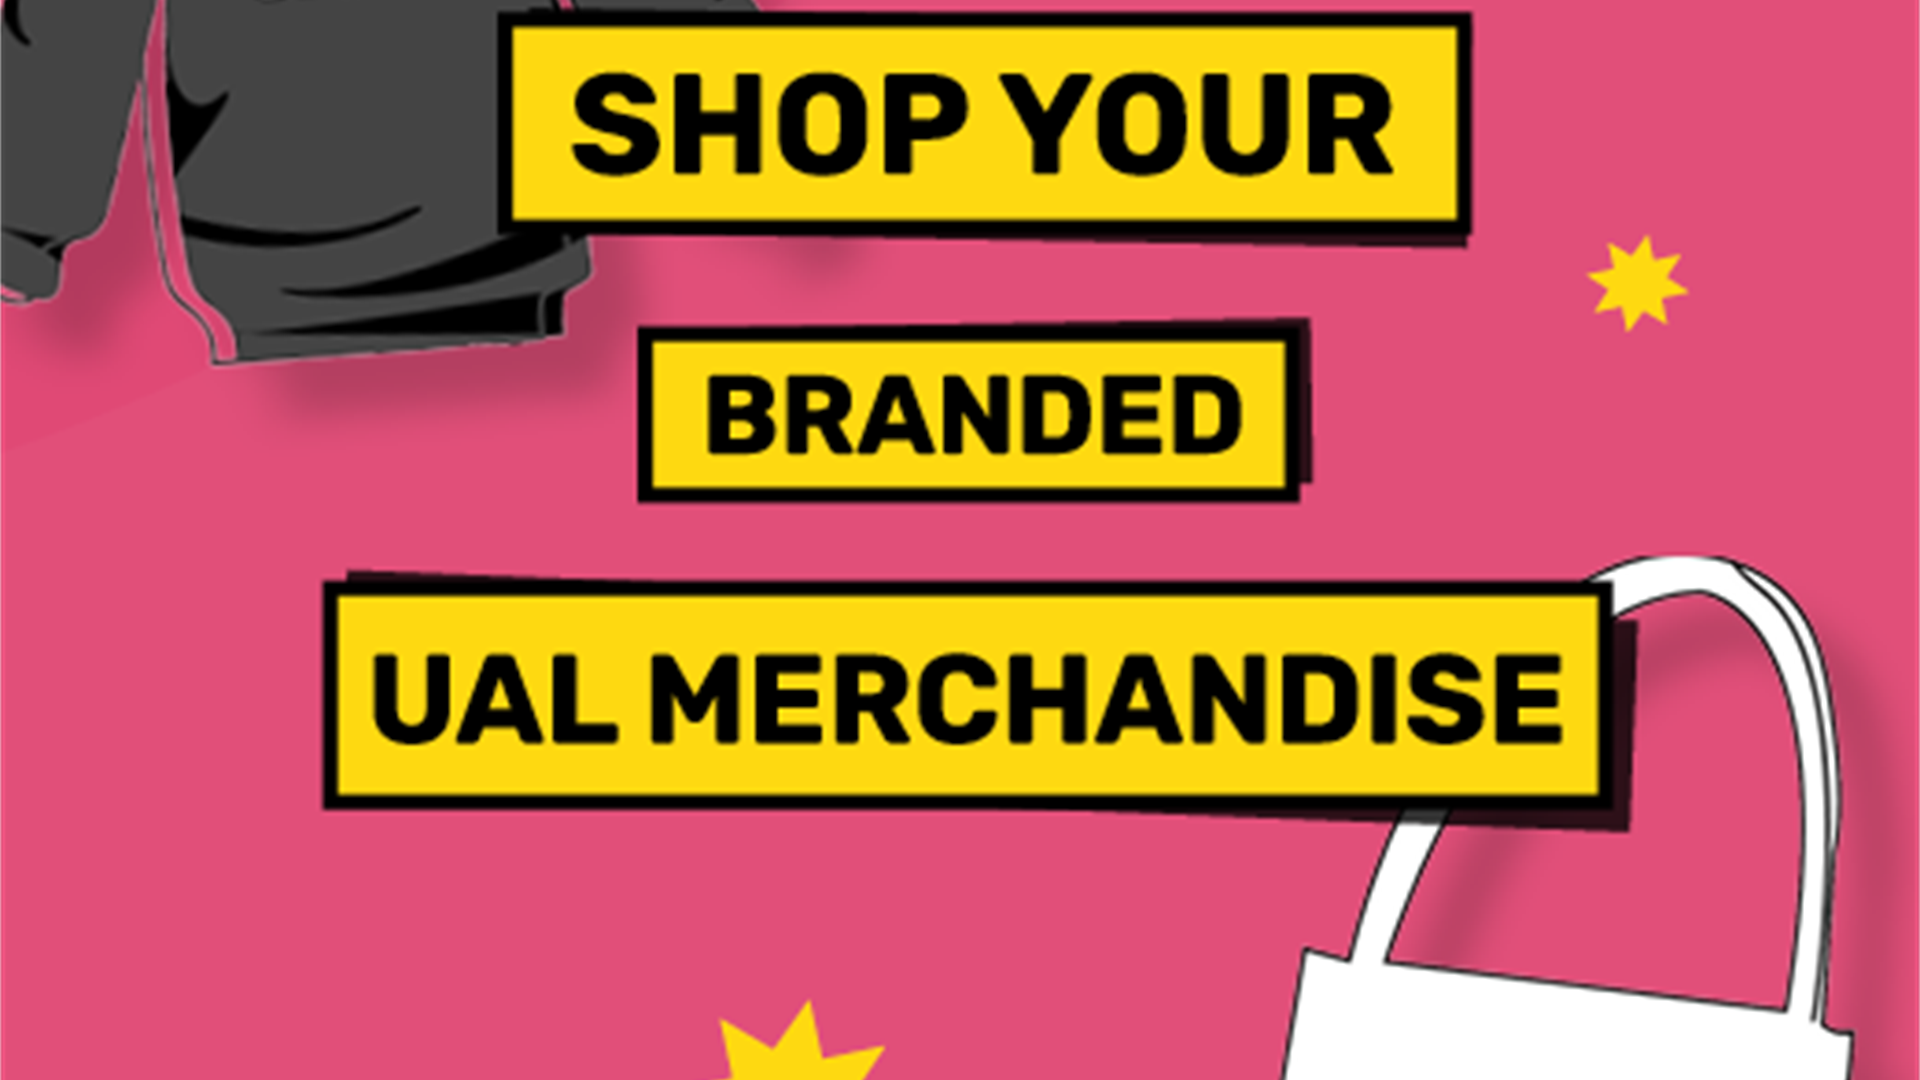 The OFFICIAL shop for all your  UAL merchandise! Any queries, please contact commercial@su.arts.ac.uk